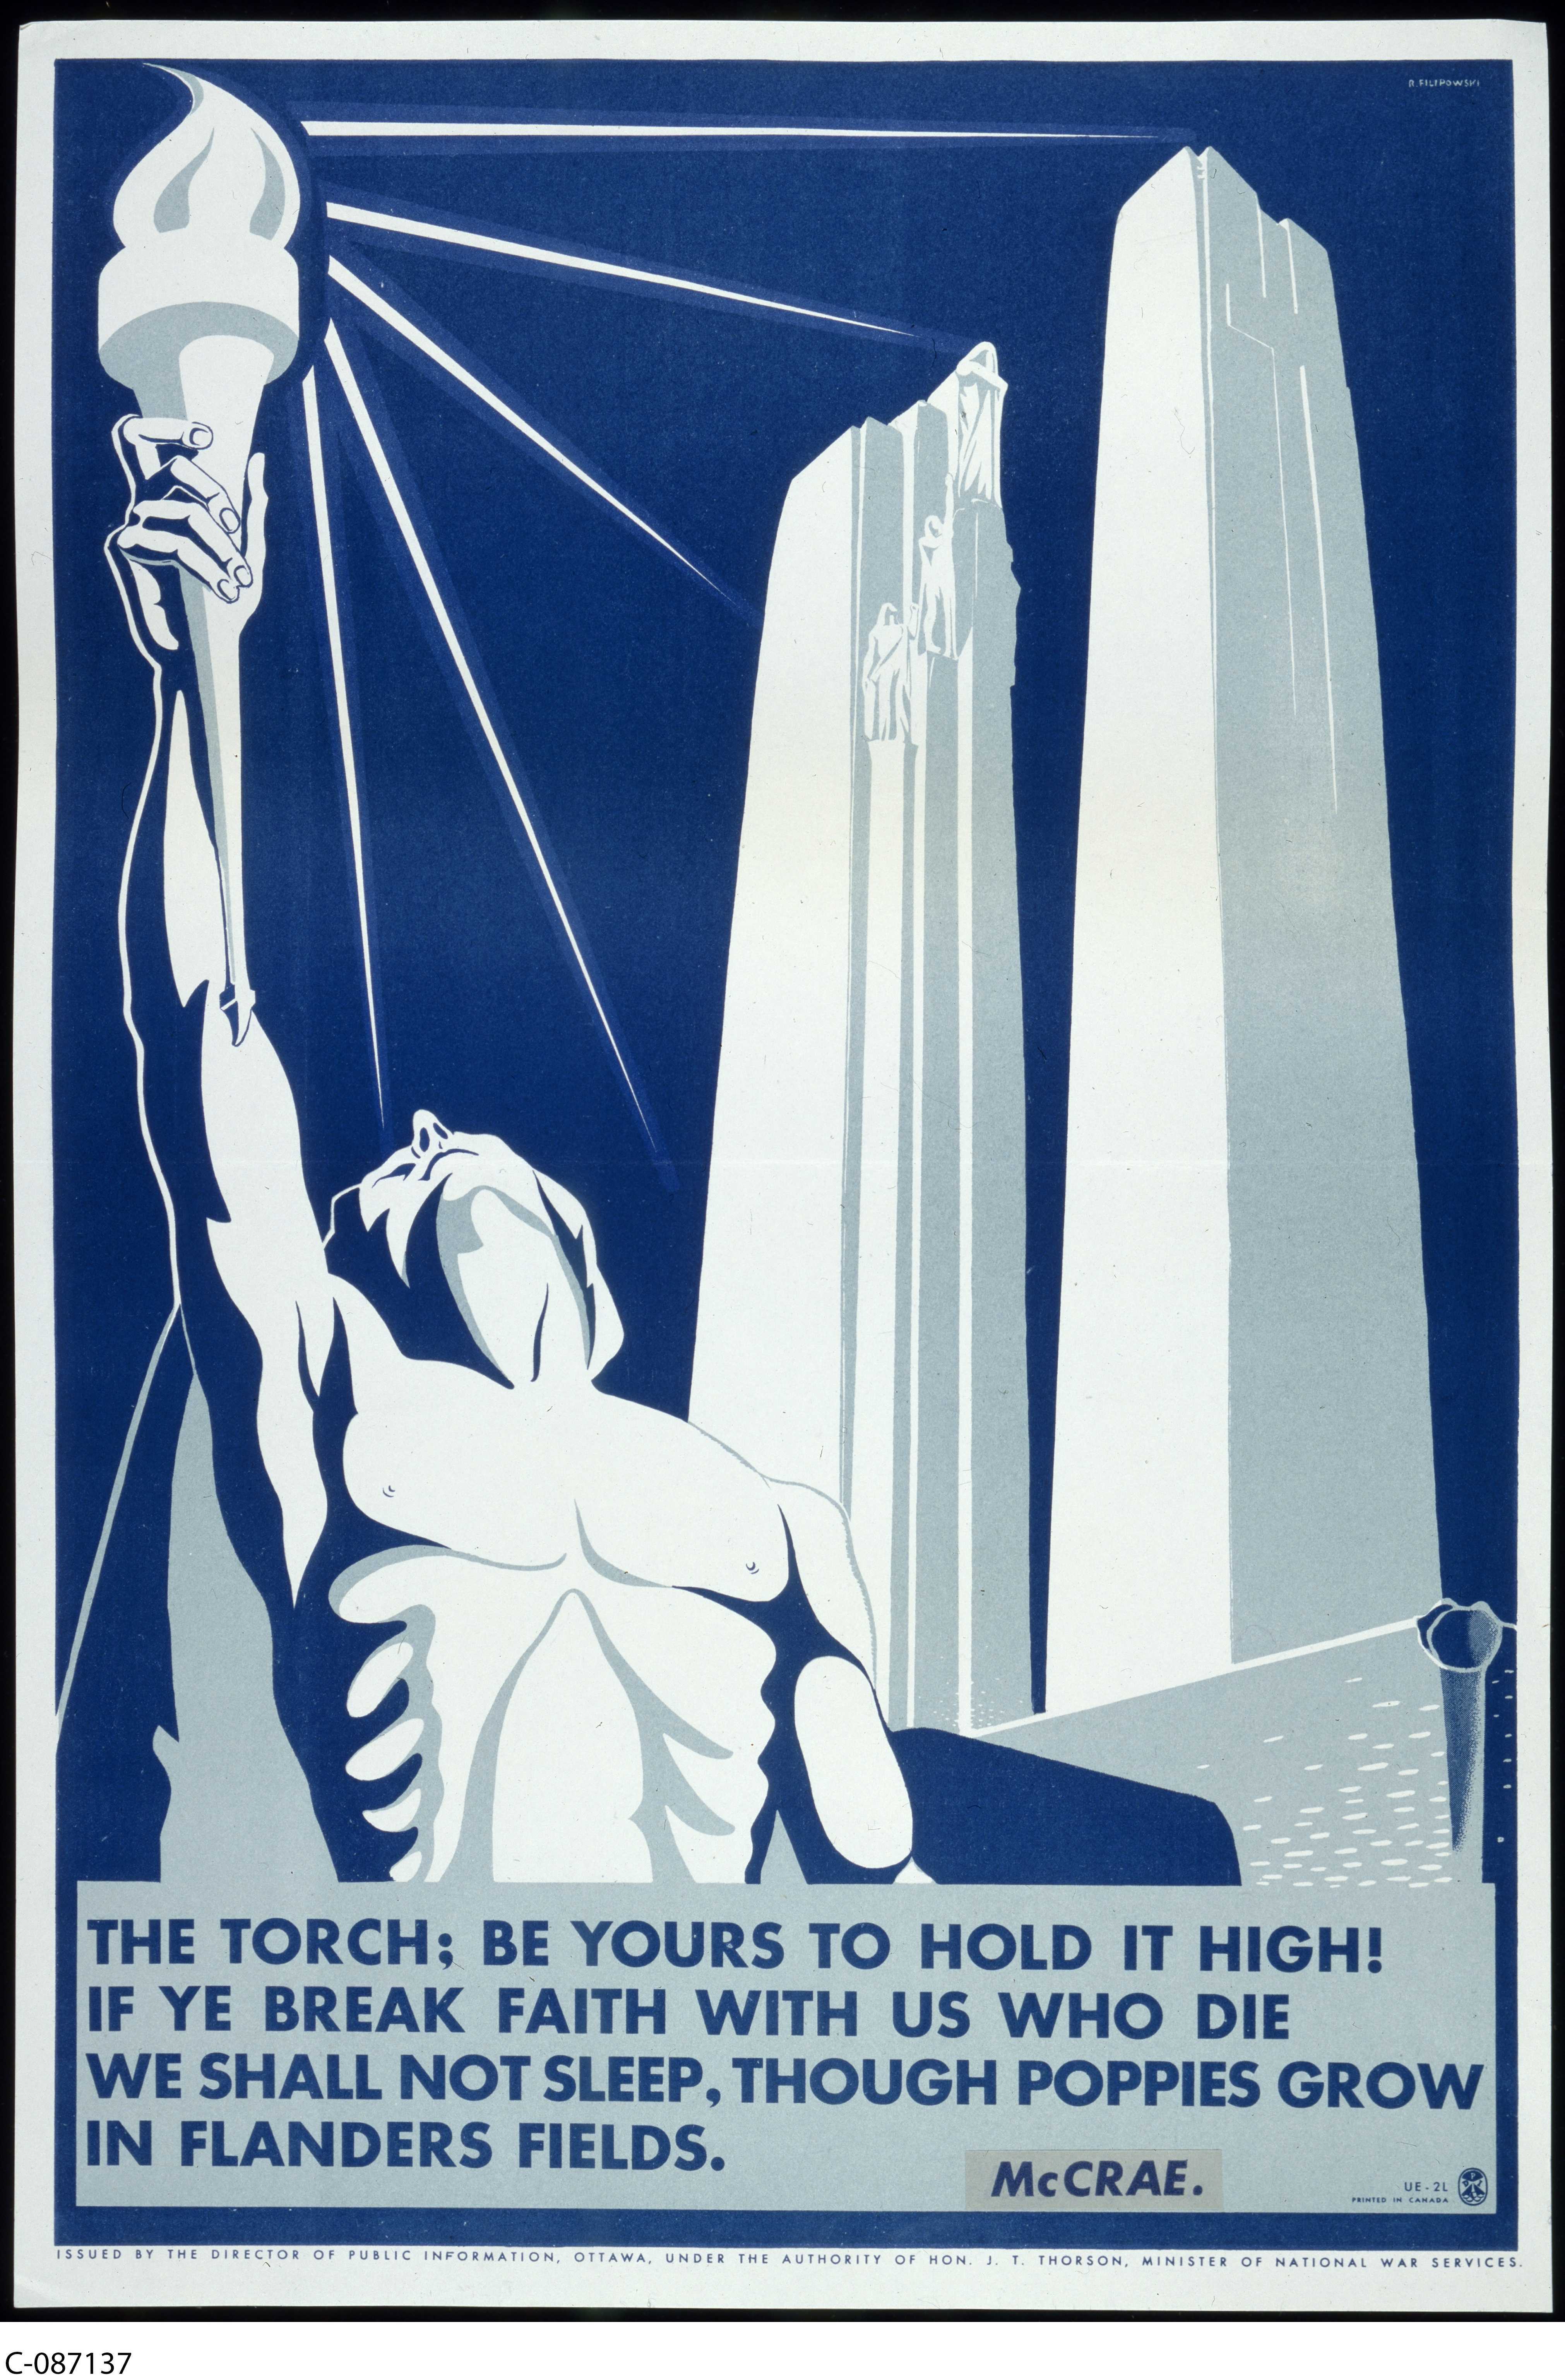 Blue and white illustrated poster. The Vimy Monument pillars on the right; a bare chested man, arms lifted towards the sky, holds a lit torch emanating beams of light.